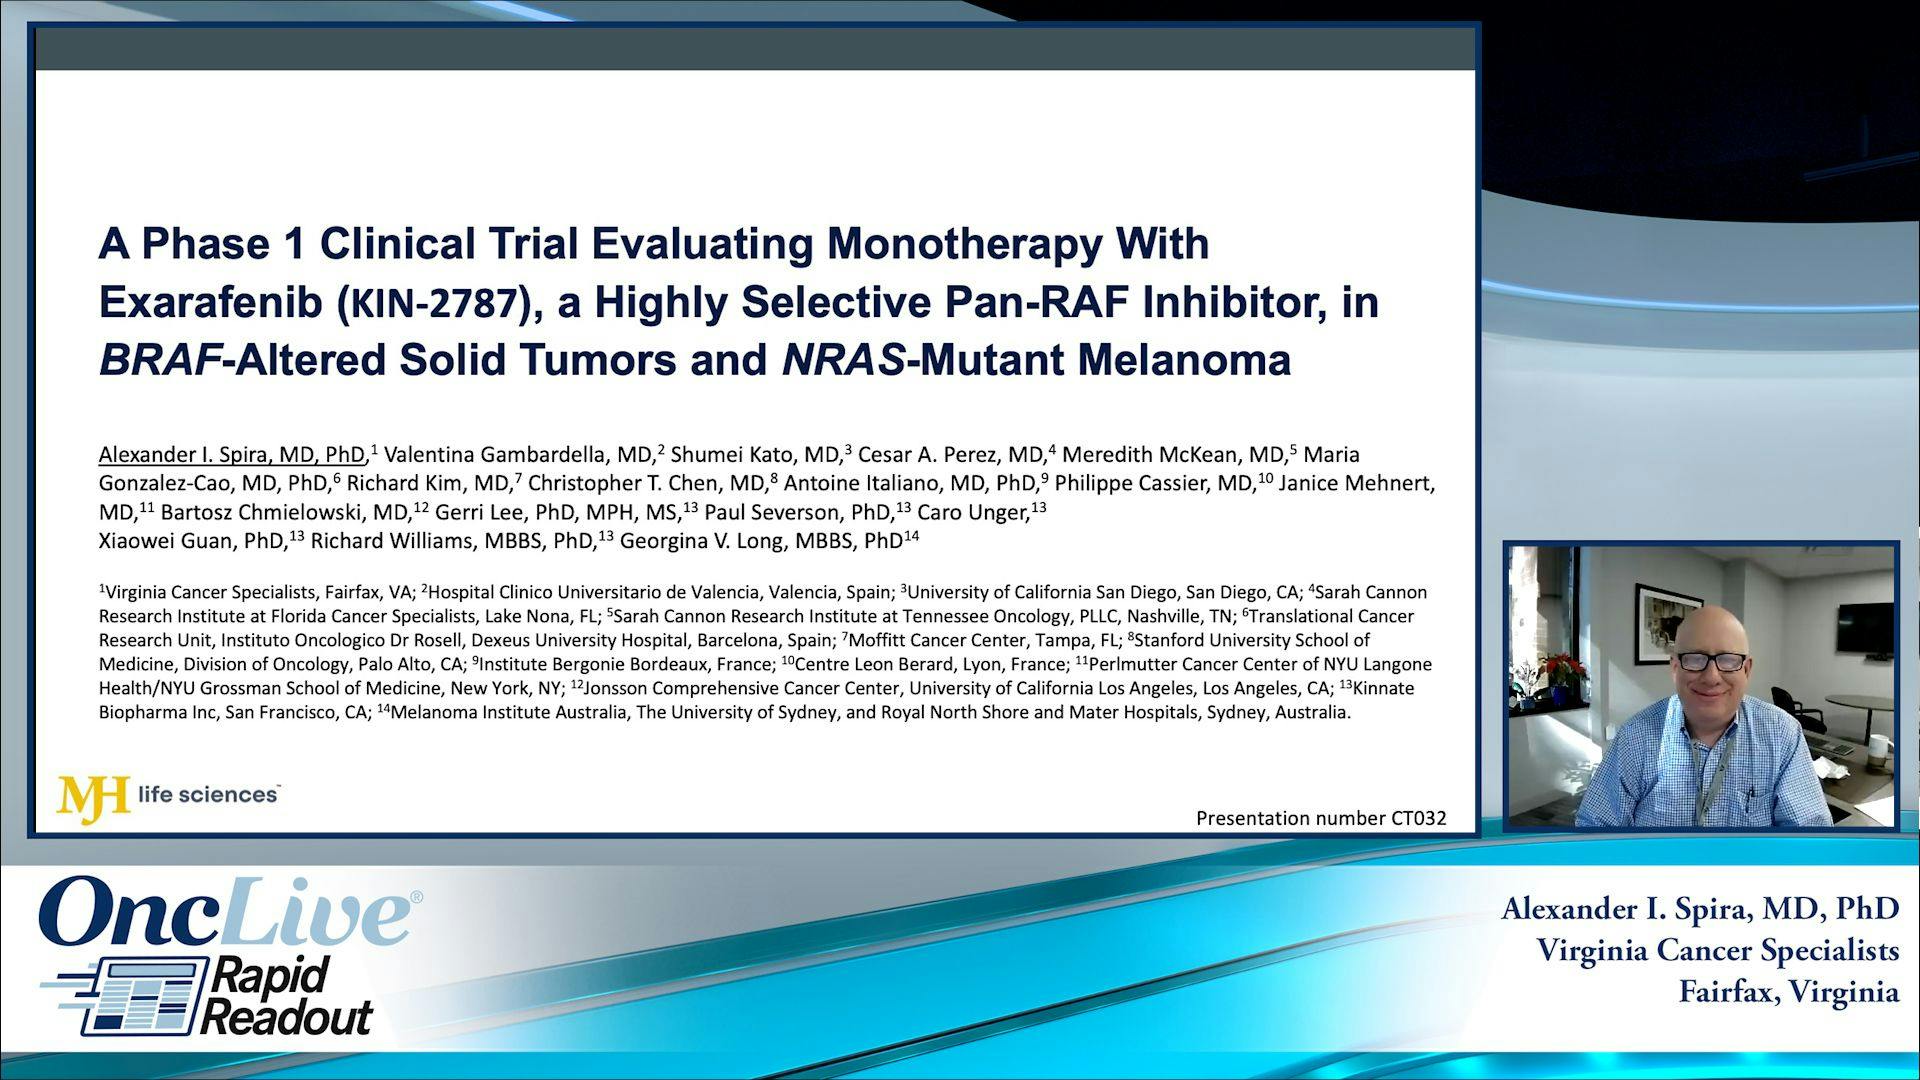 A Phase 1 Clinical Trial Evaluating Monotherapy With Exarafenib (KIN-2787), a Highly Selective Pan-RAF Inhibitor, in BRAF‑Altered Solid Tumors and NRAS-Mutant Melanoma